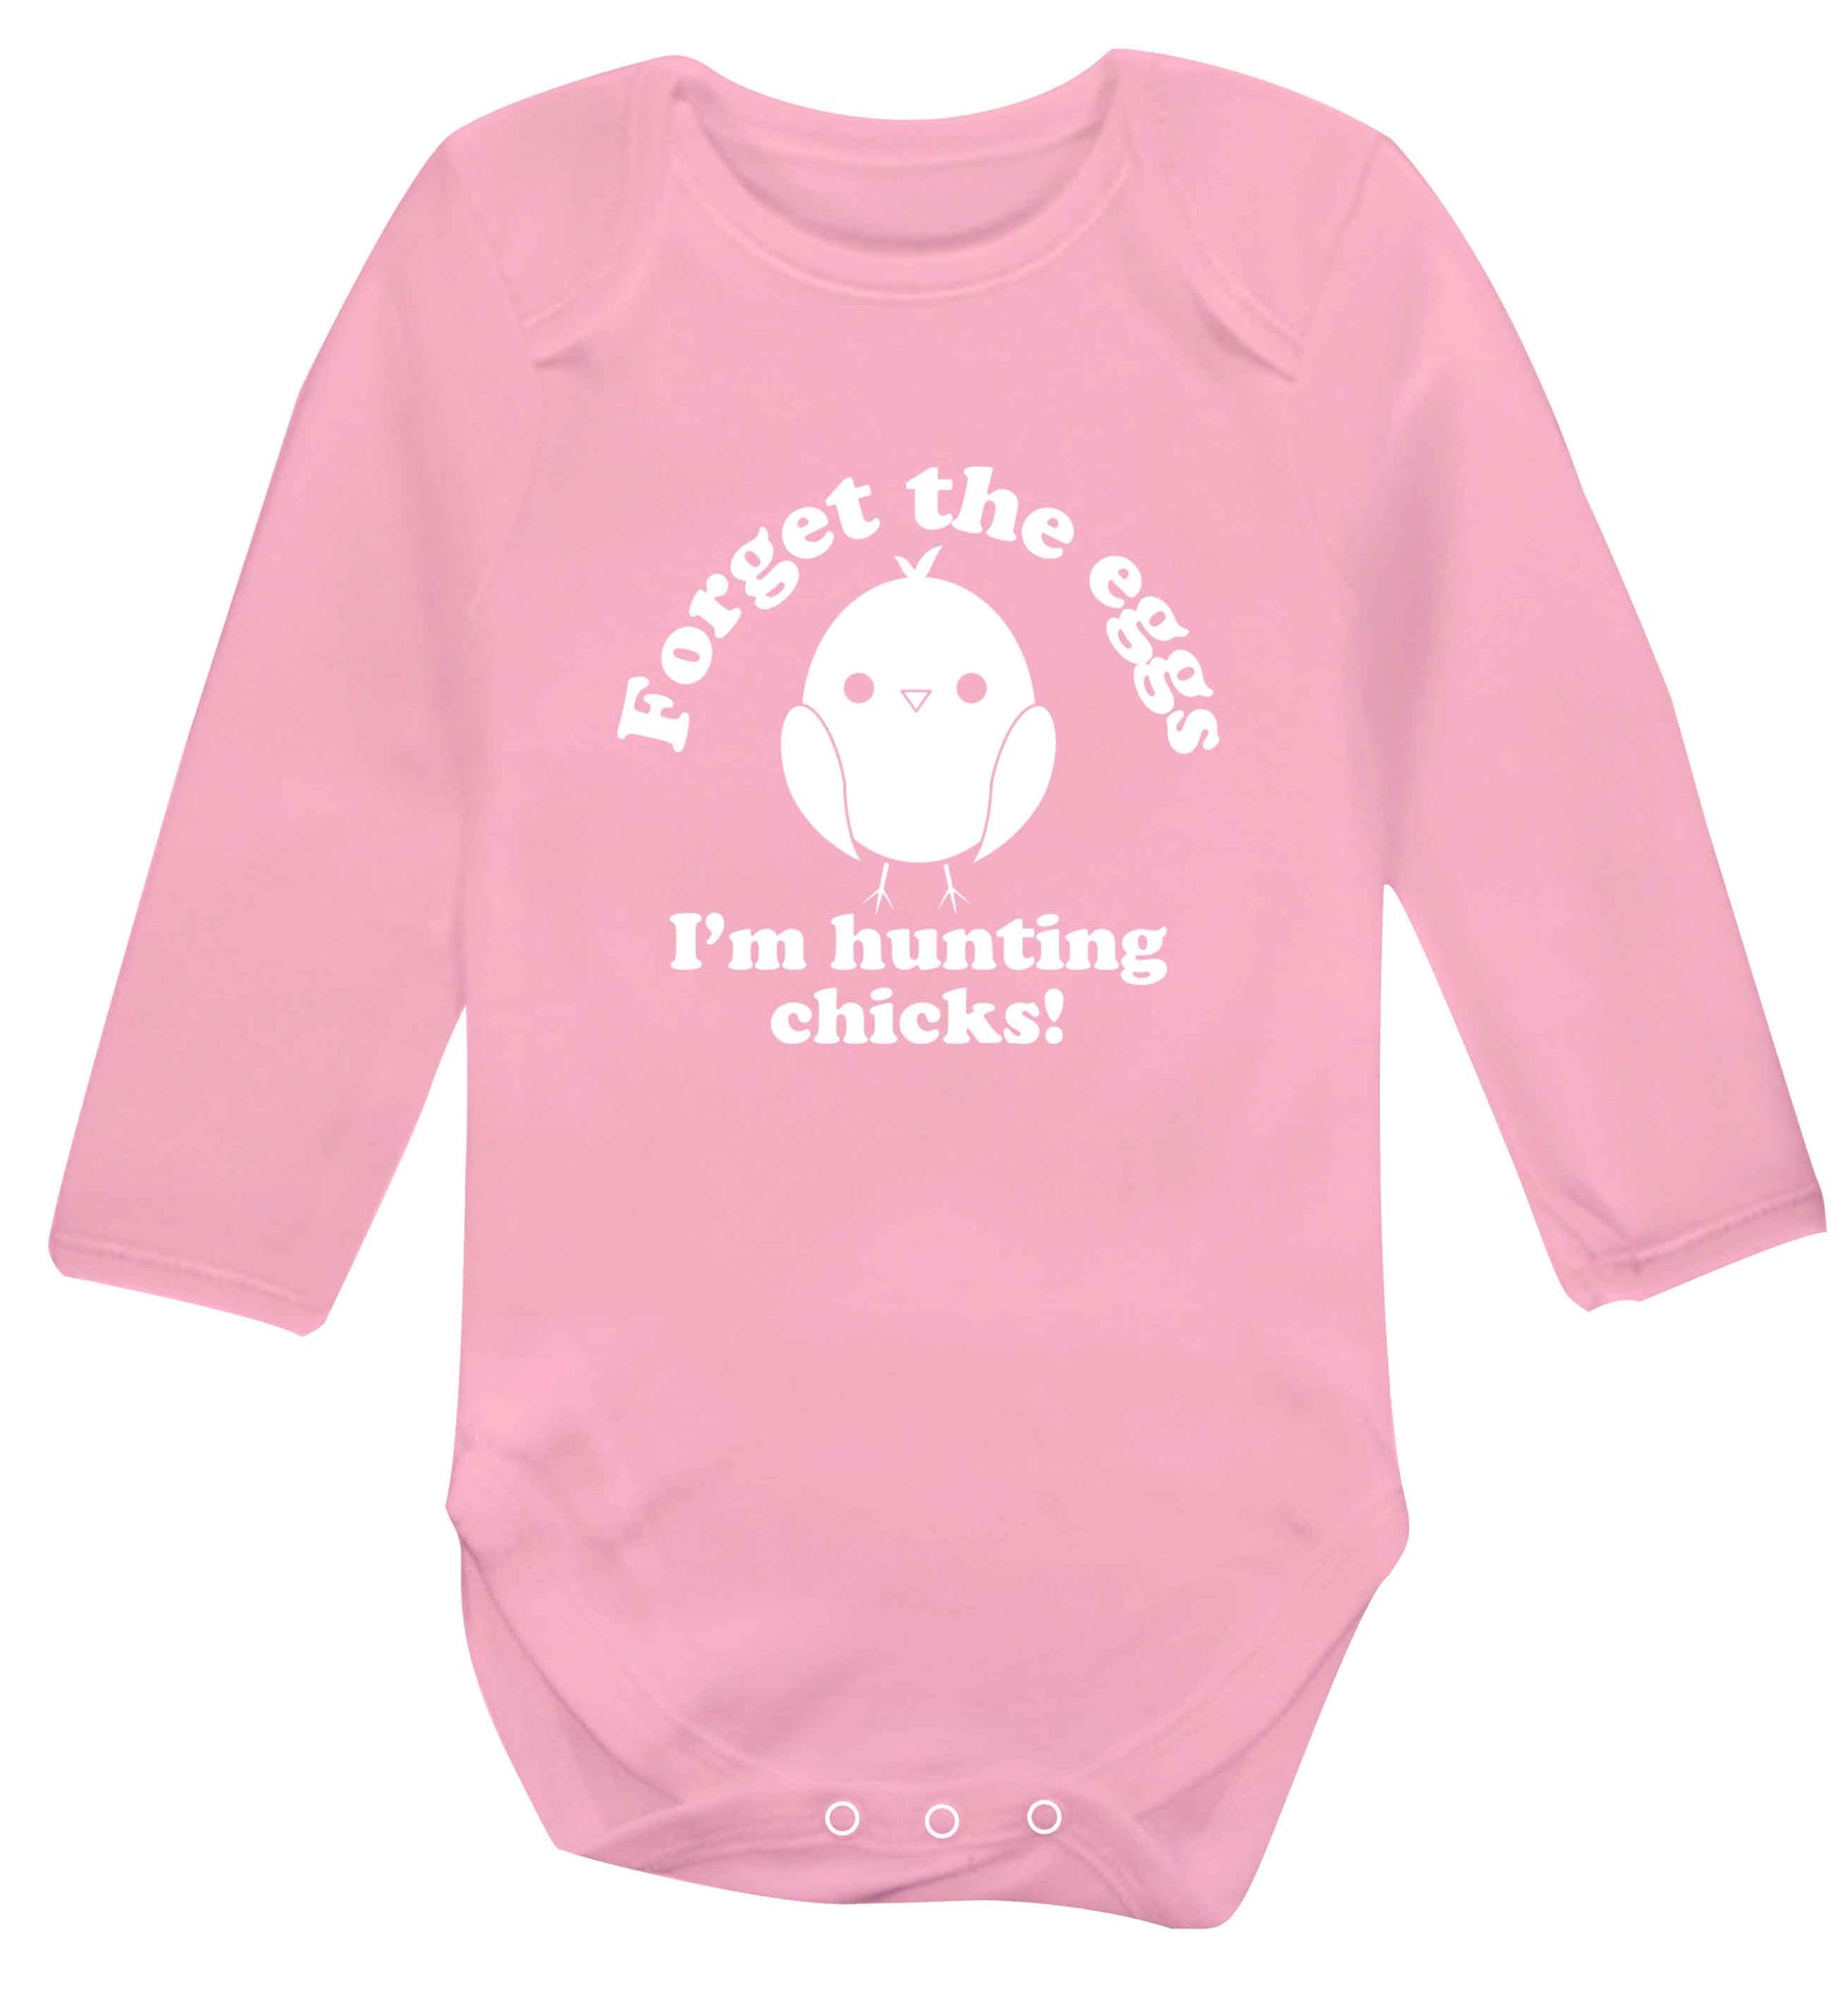 Forget the eggs I'm hunting chicks! baby vest long sleeved pale pink 6-12 months